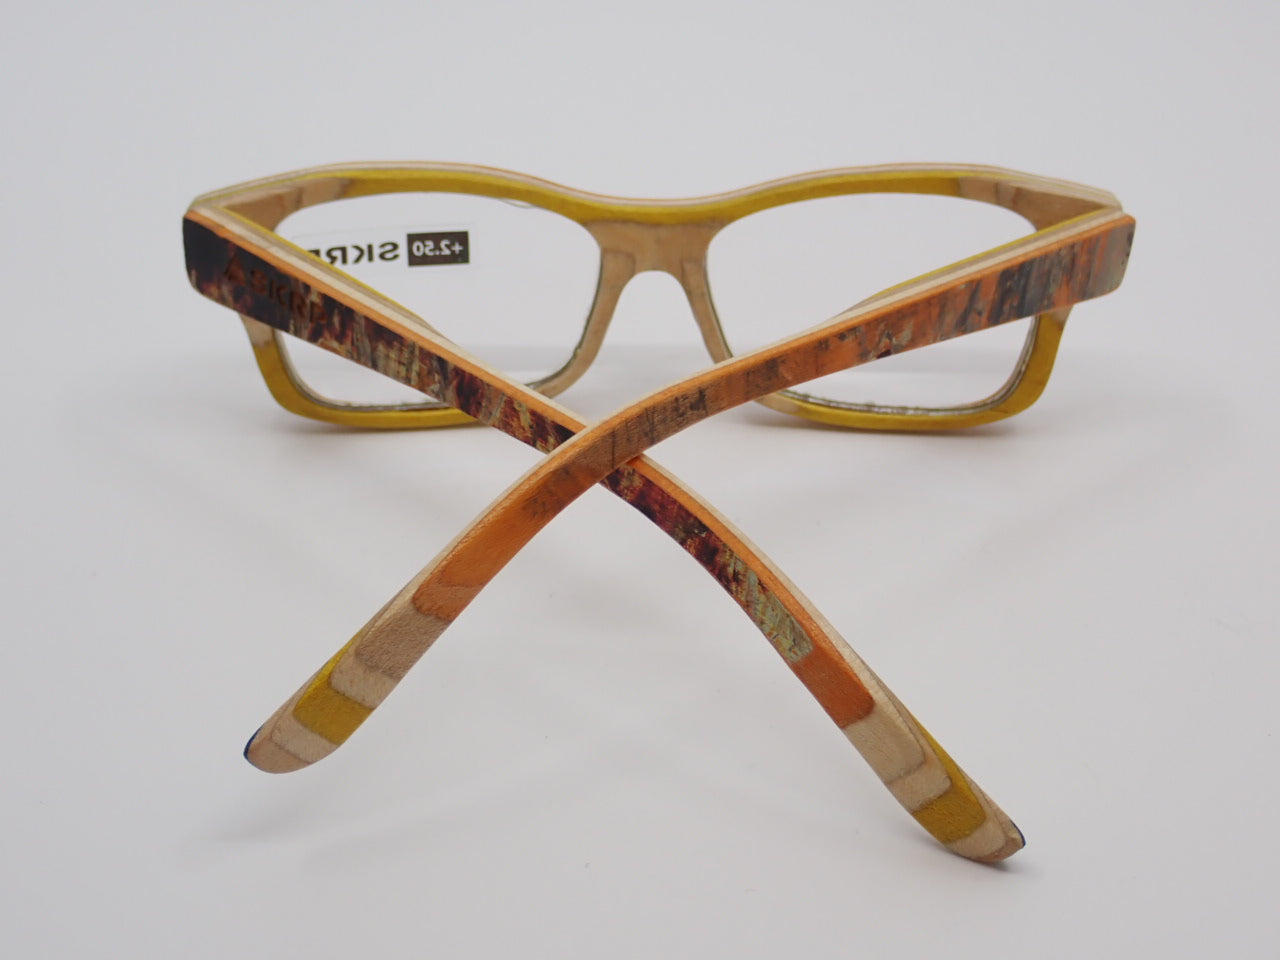 Reading Glasses, +2.50 Magnification, Recycled Skateboards (+ Options)